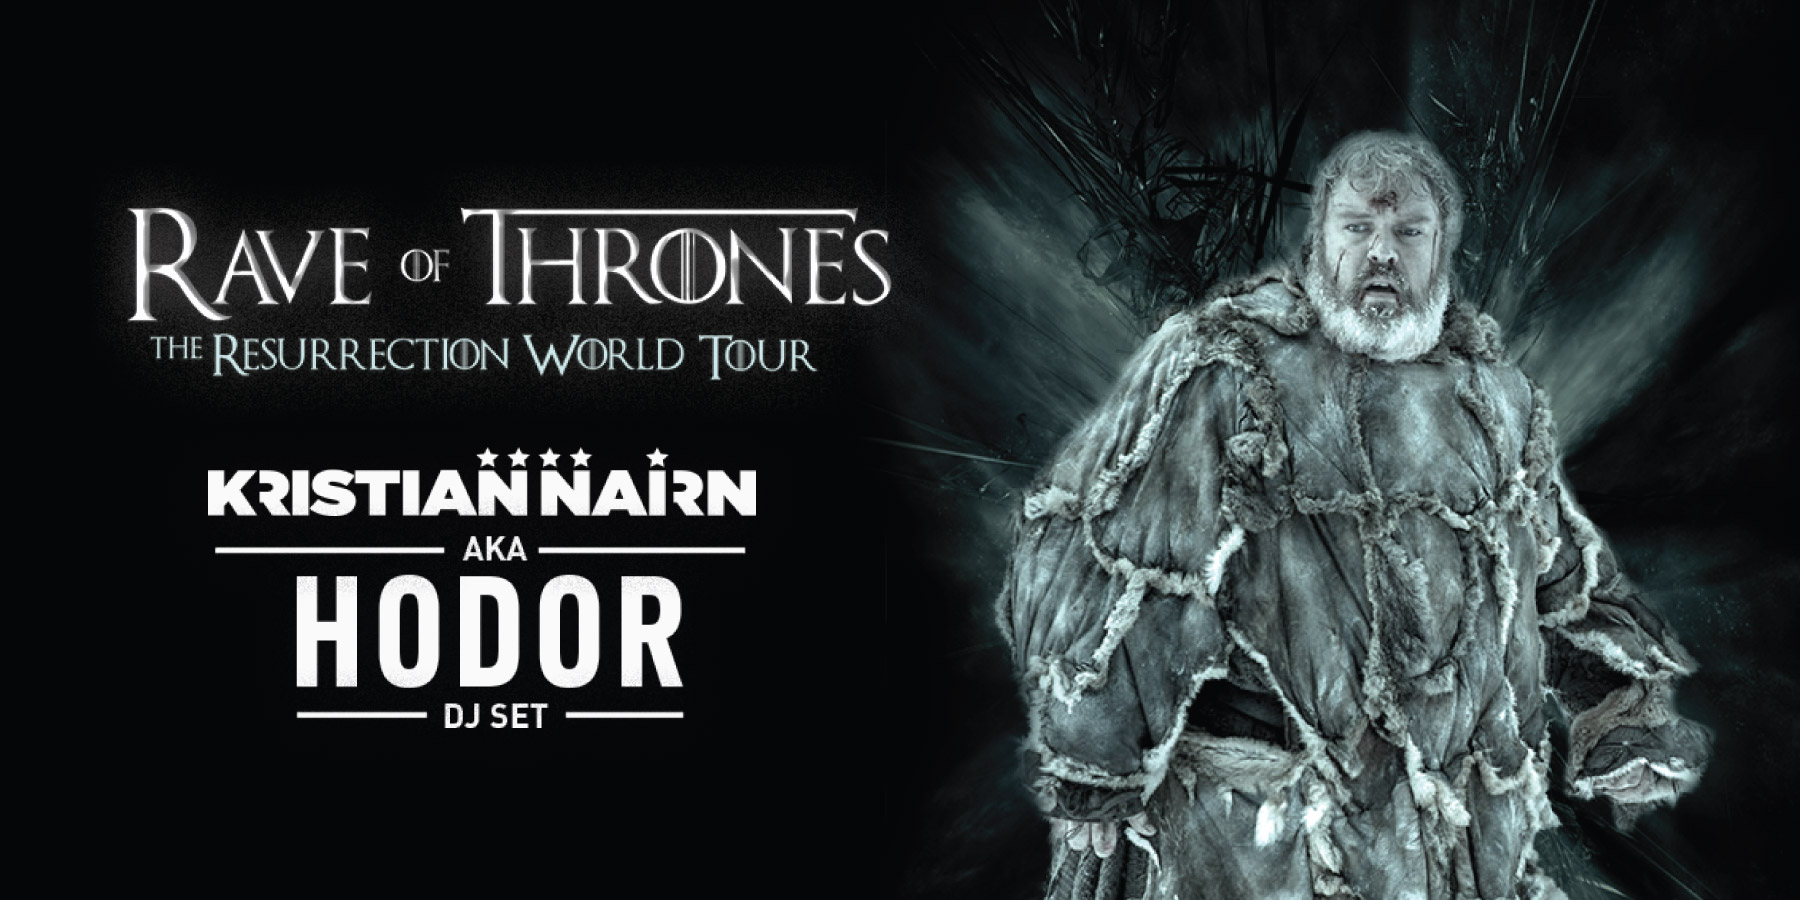 Kristian Nairn (aka Hodor from Game of Thrones) presents Rave of Thrones